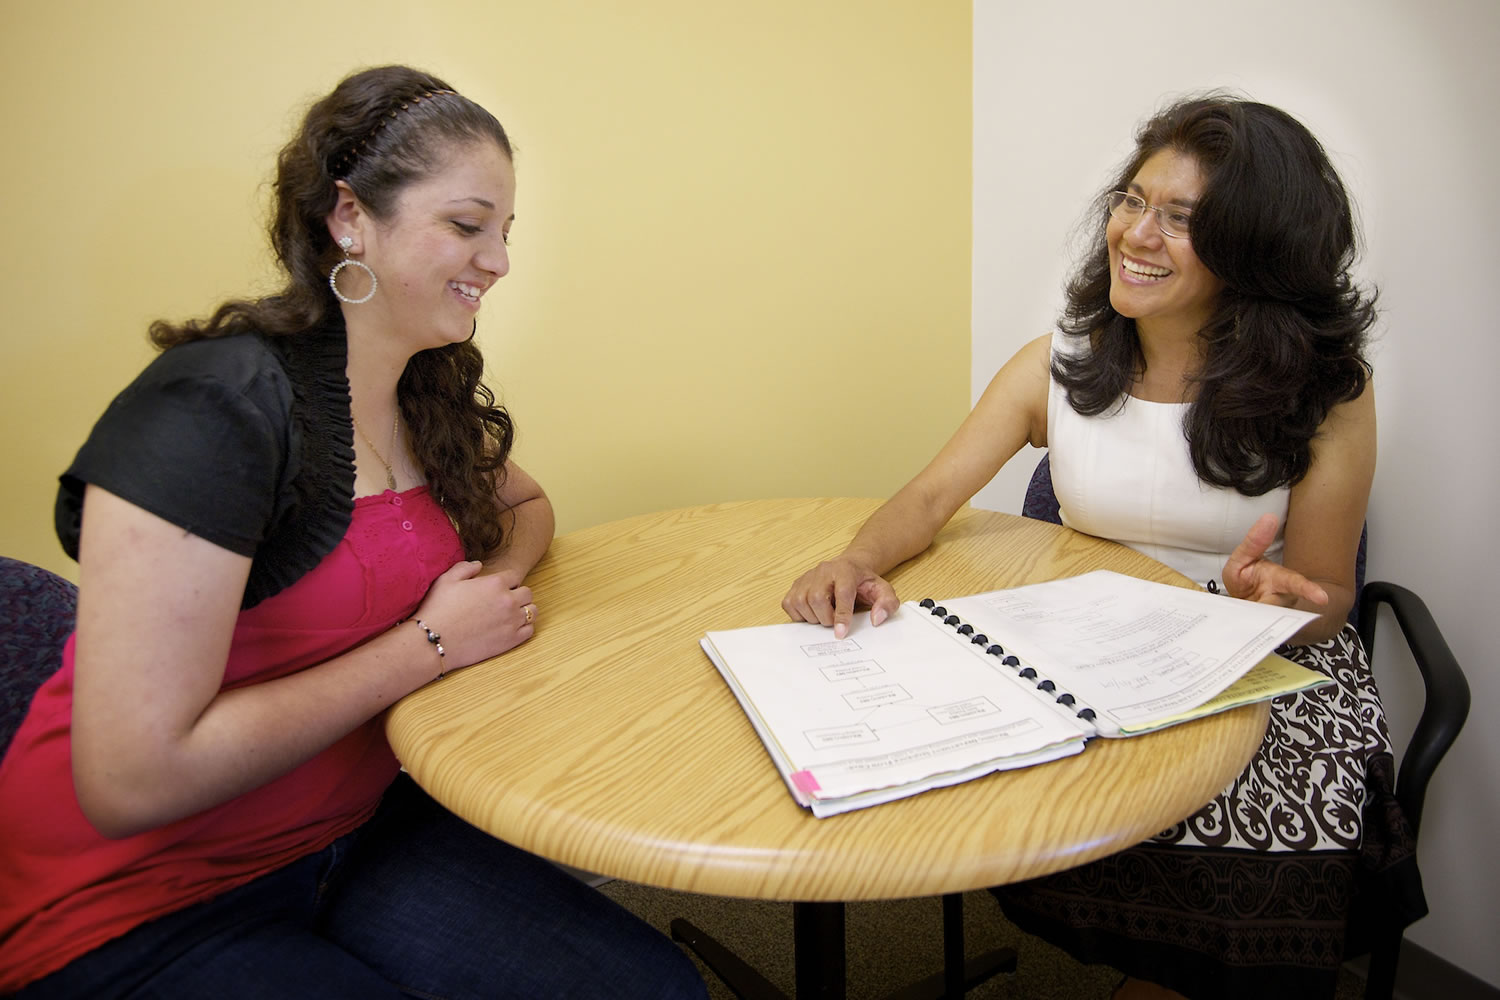 Rosalba Pitkin, right, counsels Julie Mercado, a second-year student at Clark College. Pitkin is an Aztec-Mexican who immigrated to the United States and has played a pivotal role on the State Commission on Hispanic Affairs. In her day job, she helps international students at Clark College adjust to the U.S.